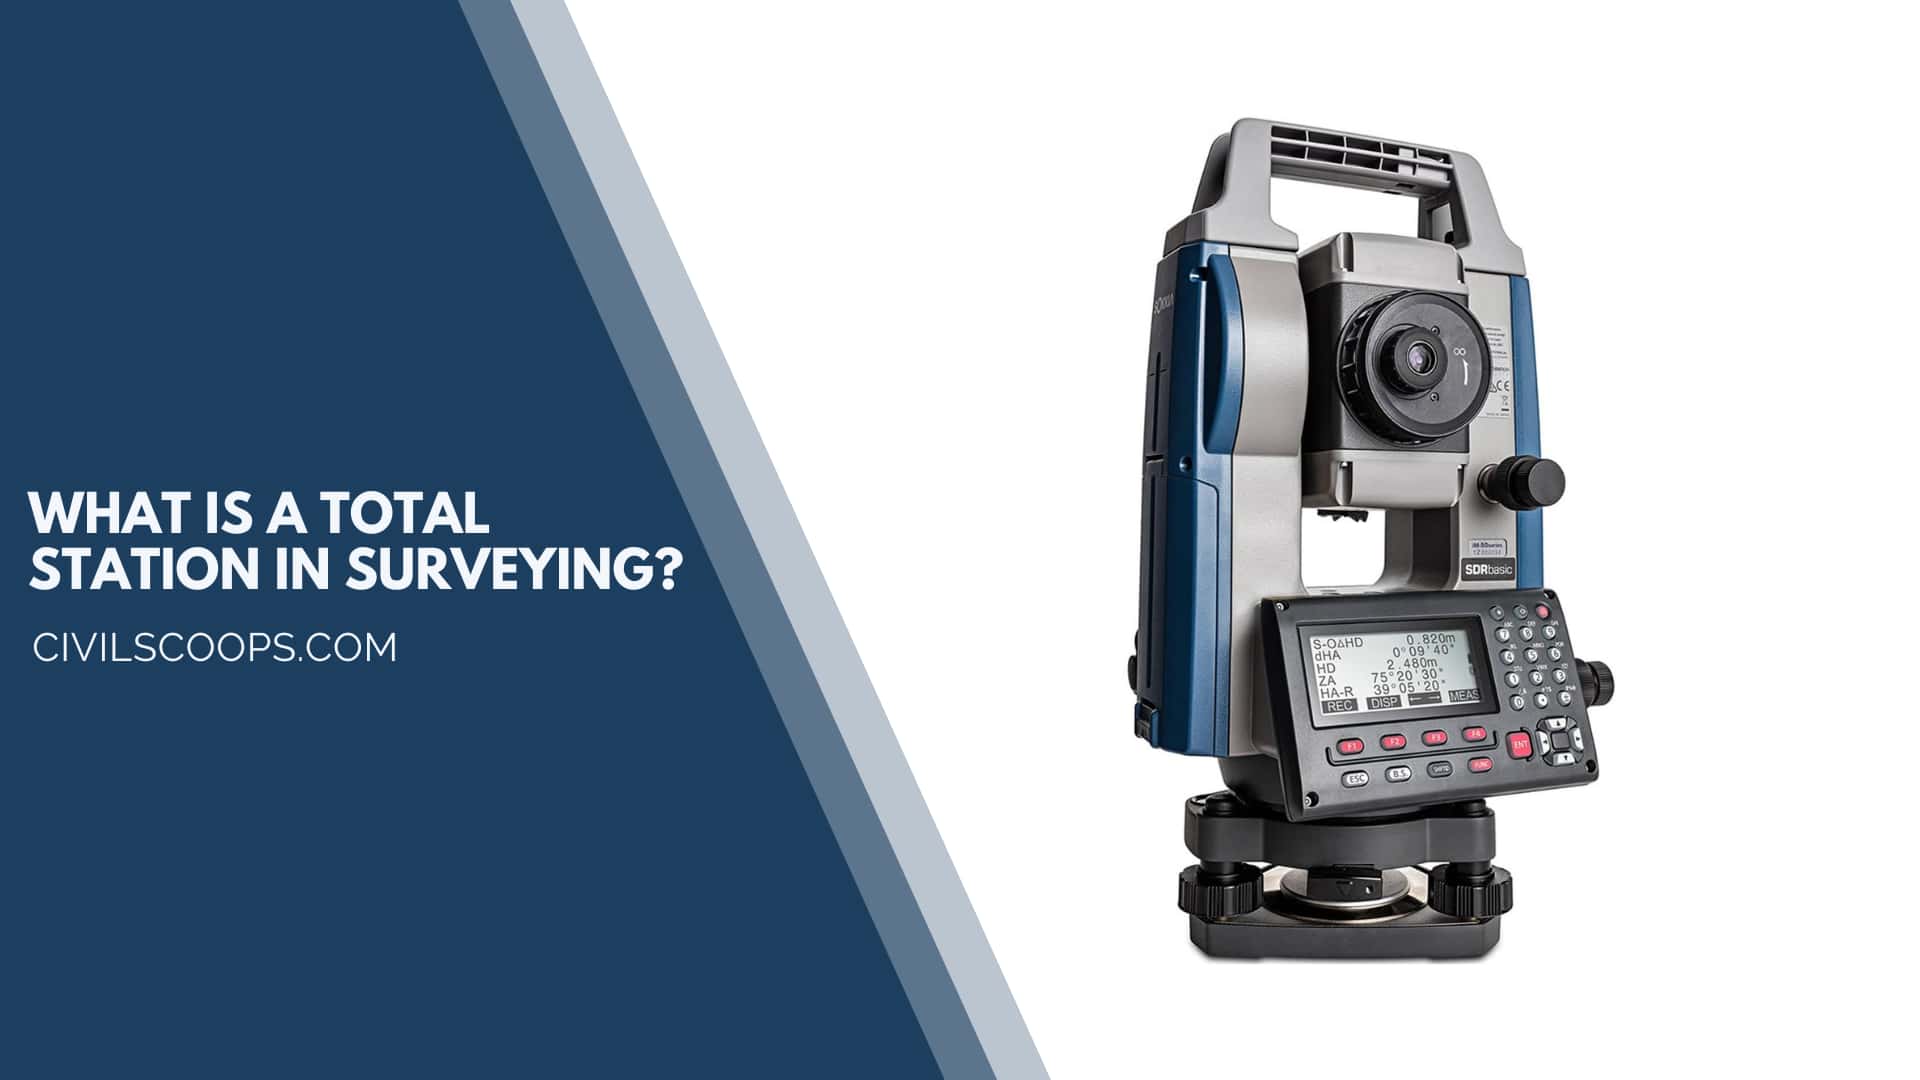 What Is a Total Station in Surveying